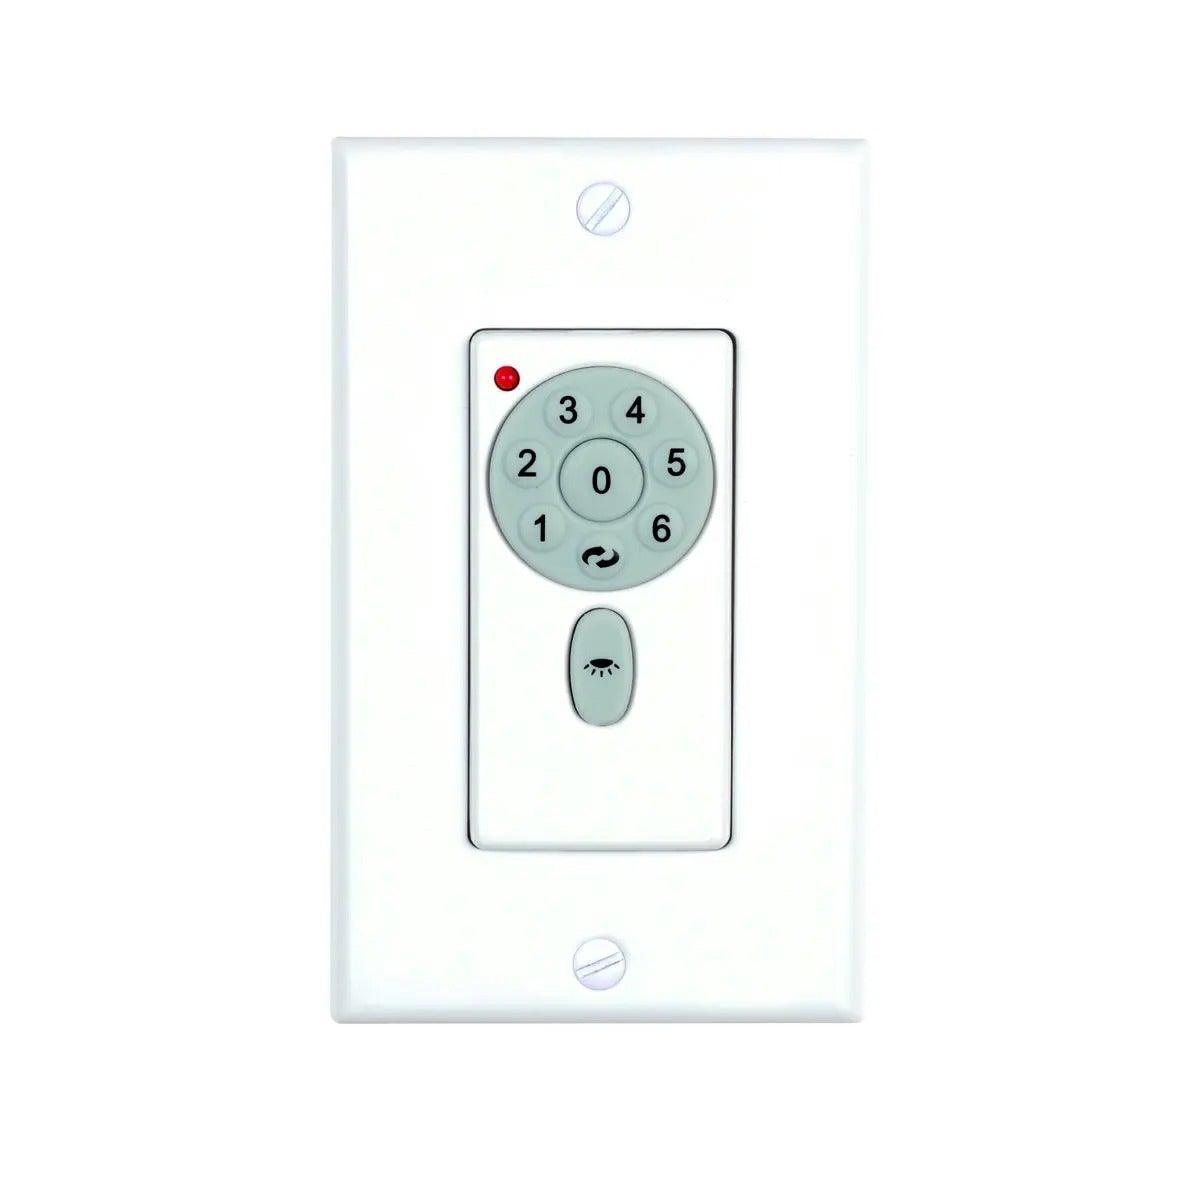 Ceiling Fan Wall Control with LED dimmer - LV LIGHTING